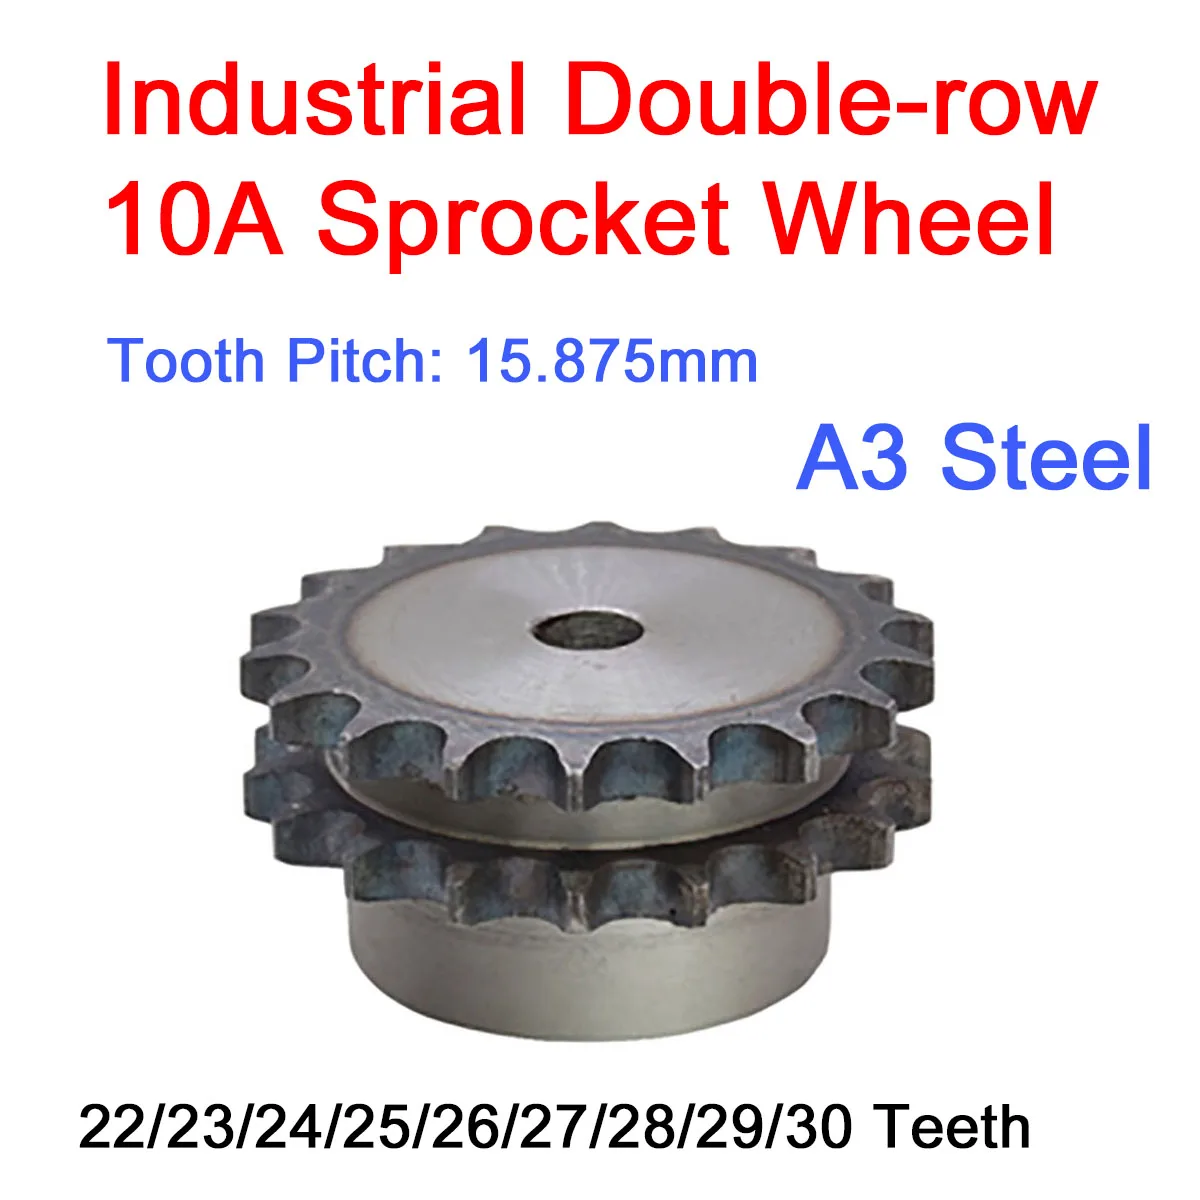 

1Pc 10A Double-row Sprocket Wheel 22/23/24/25/26/27/28/29/30Teeth A3 Steel Chain Gear with Step Process Hole Tooth Pitch15.875mm